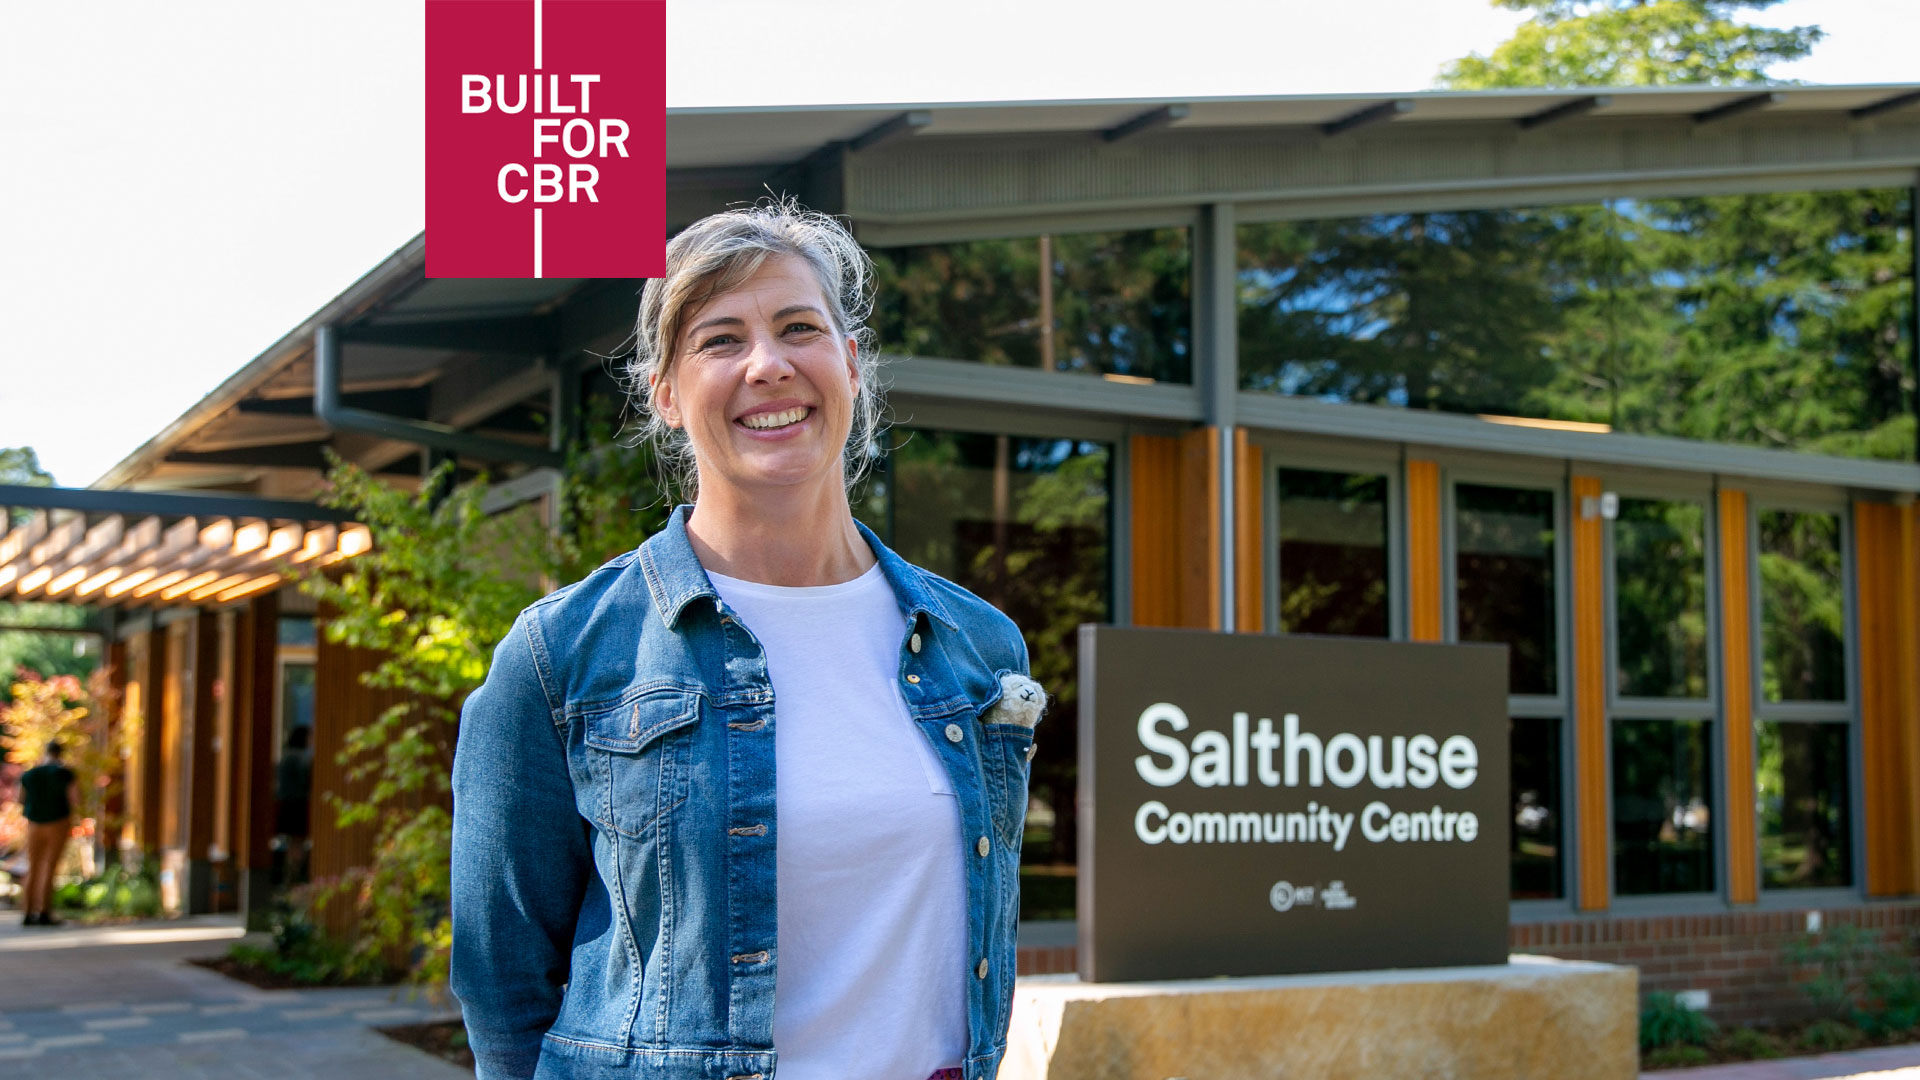 A woman smiles outside a new-looking building. The sign says Salthouse Community Centre.